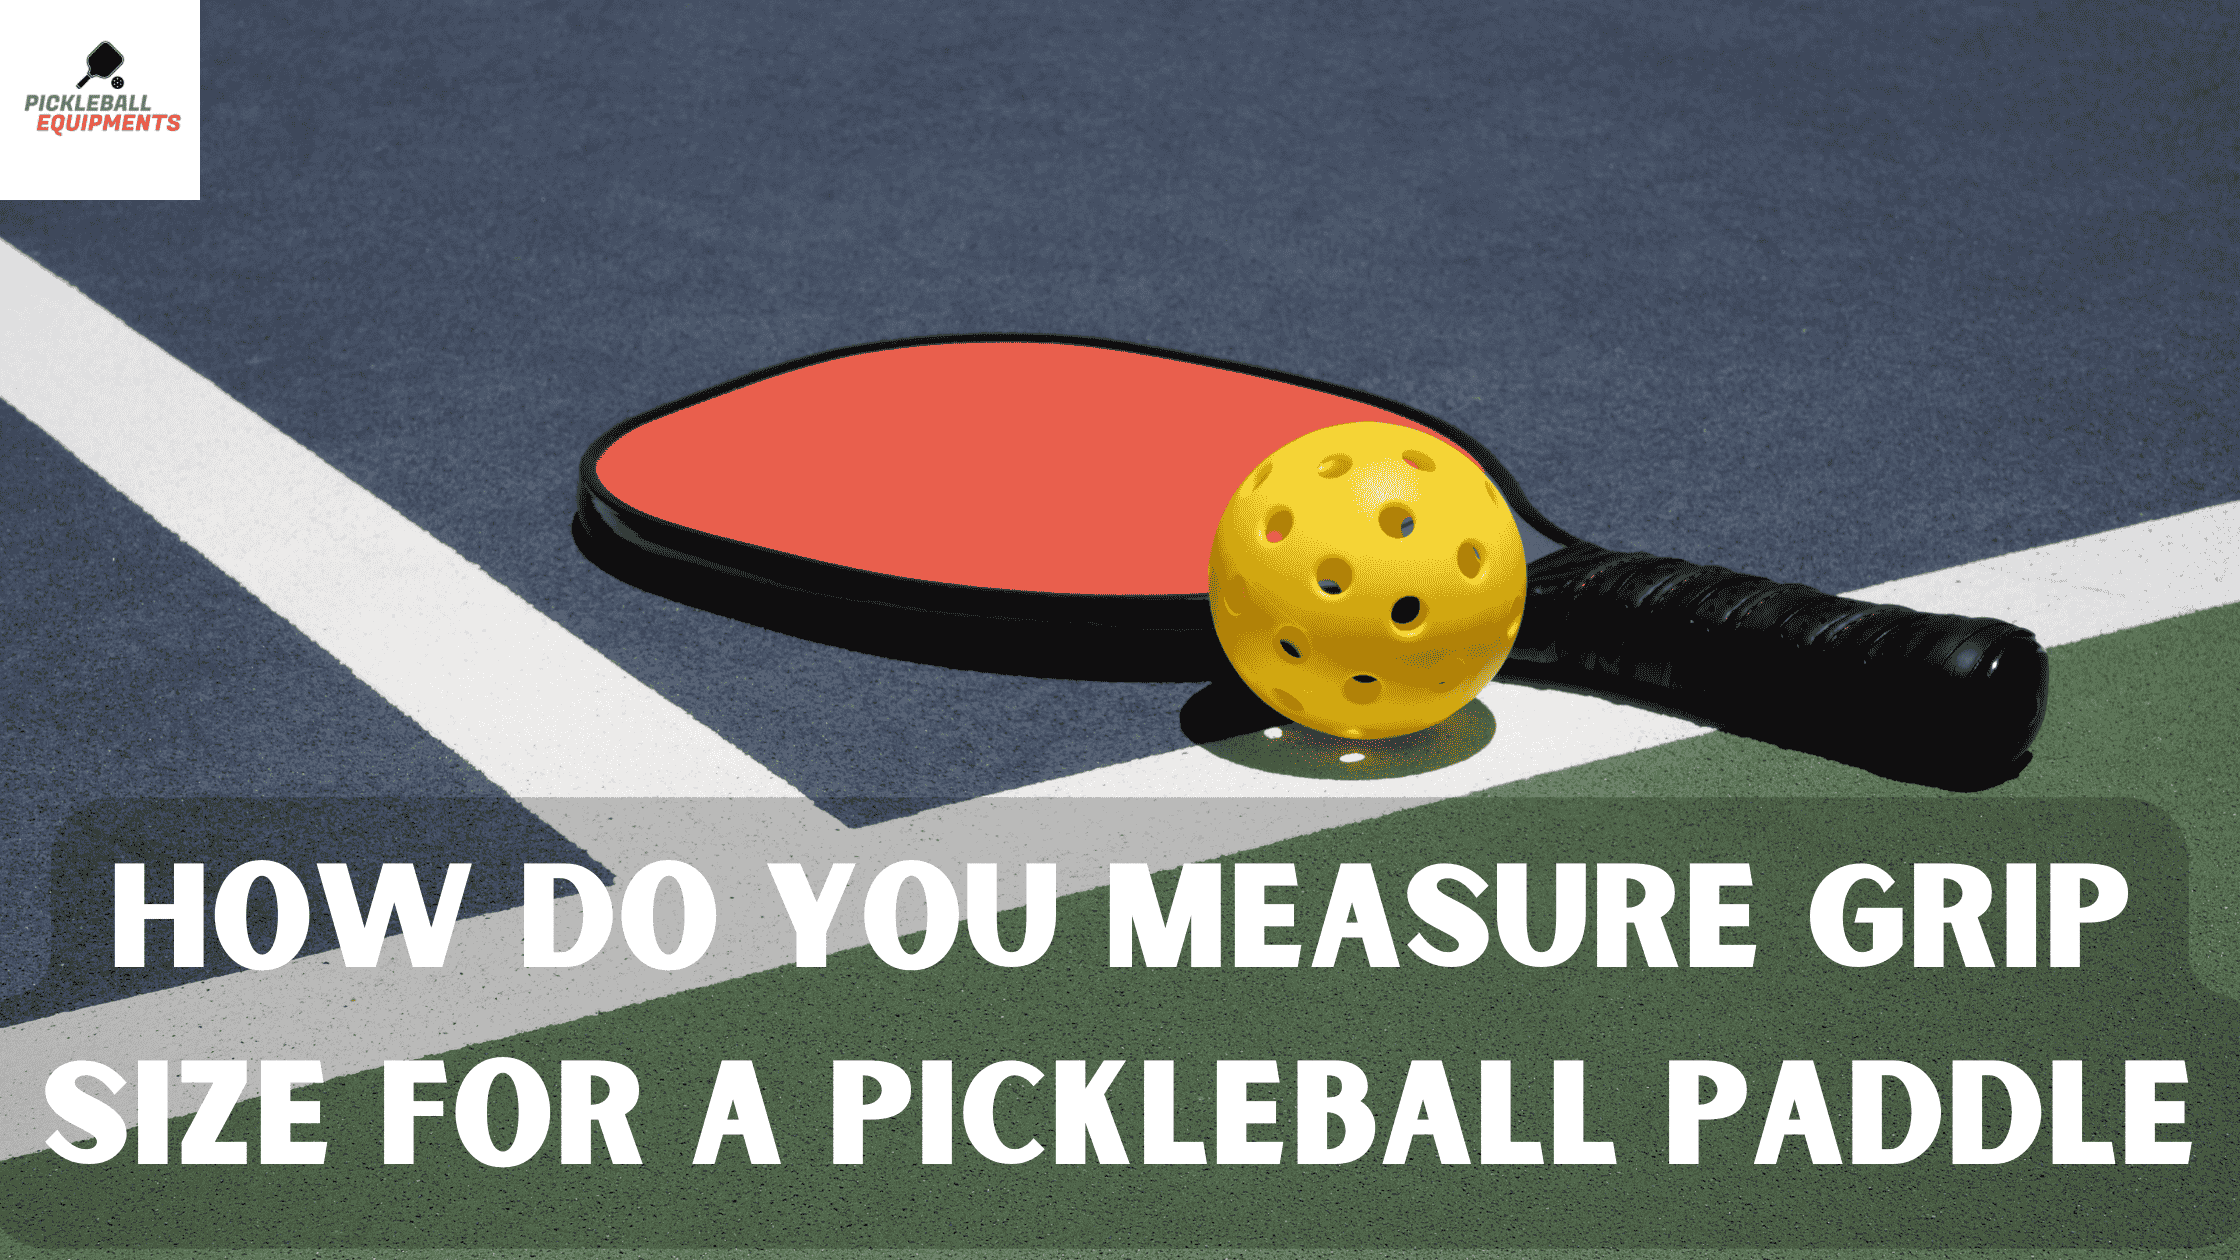 How-do-you-measure-grip-size-for-a-pickleball-paddle